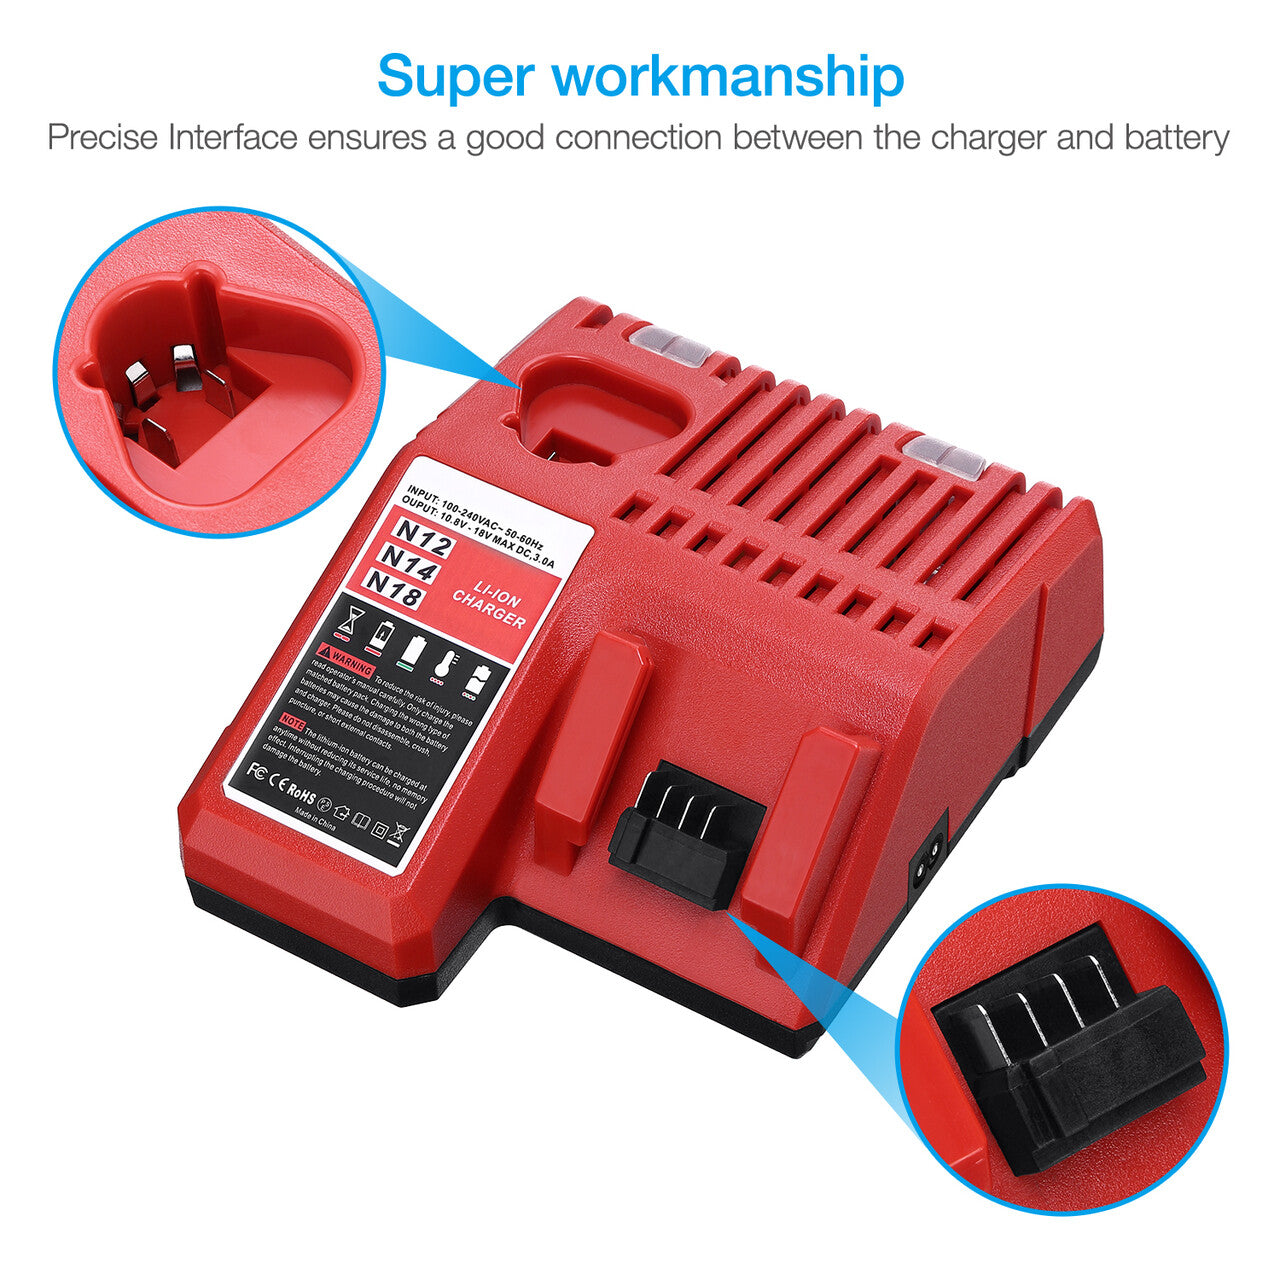 Rapid Charger Compatible with Milwaukee M14 M18 M12 Battery